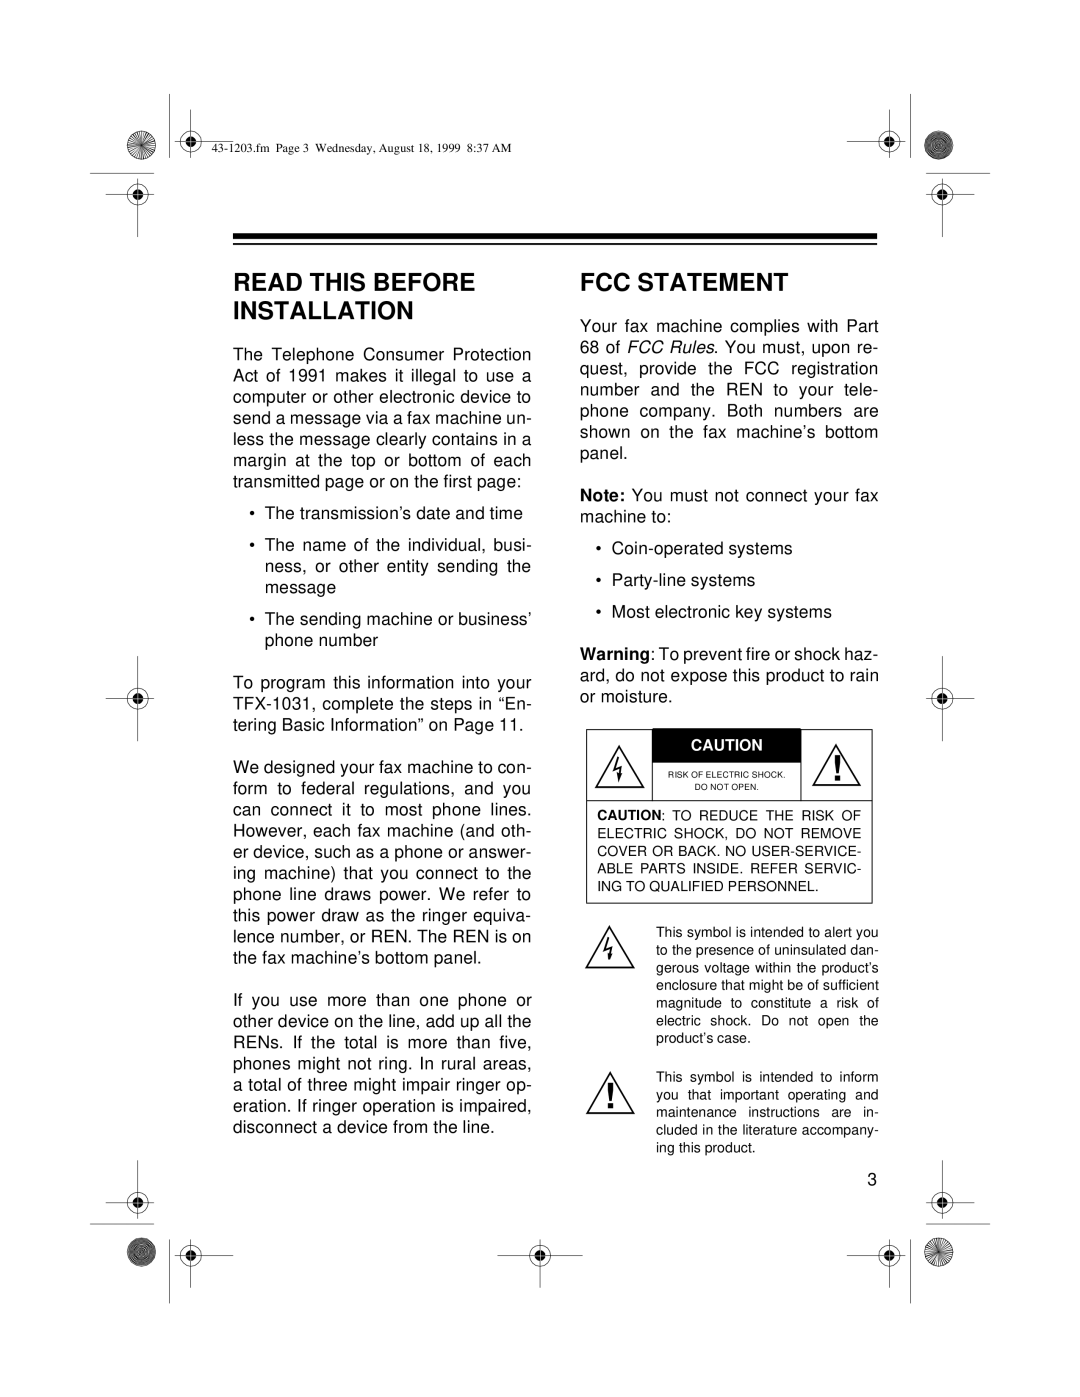 Radio Shack TFX-1031 owner manual Read This Before Installation, Fcc Statement 